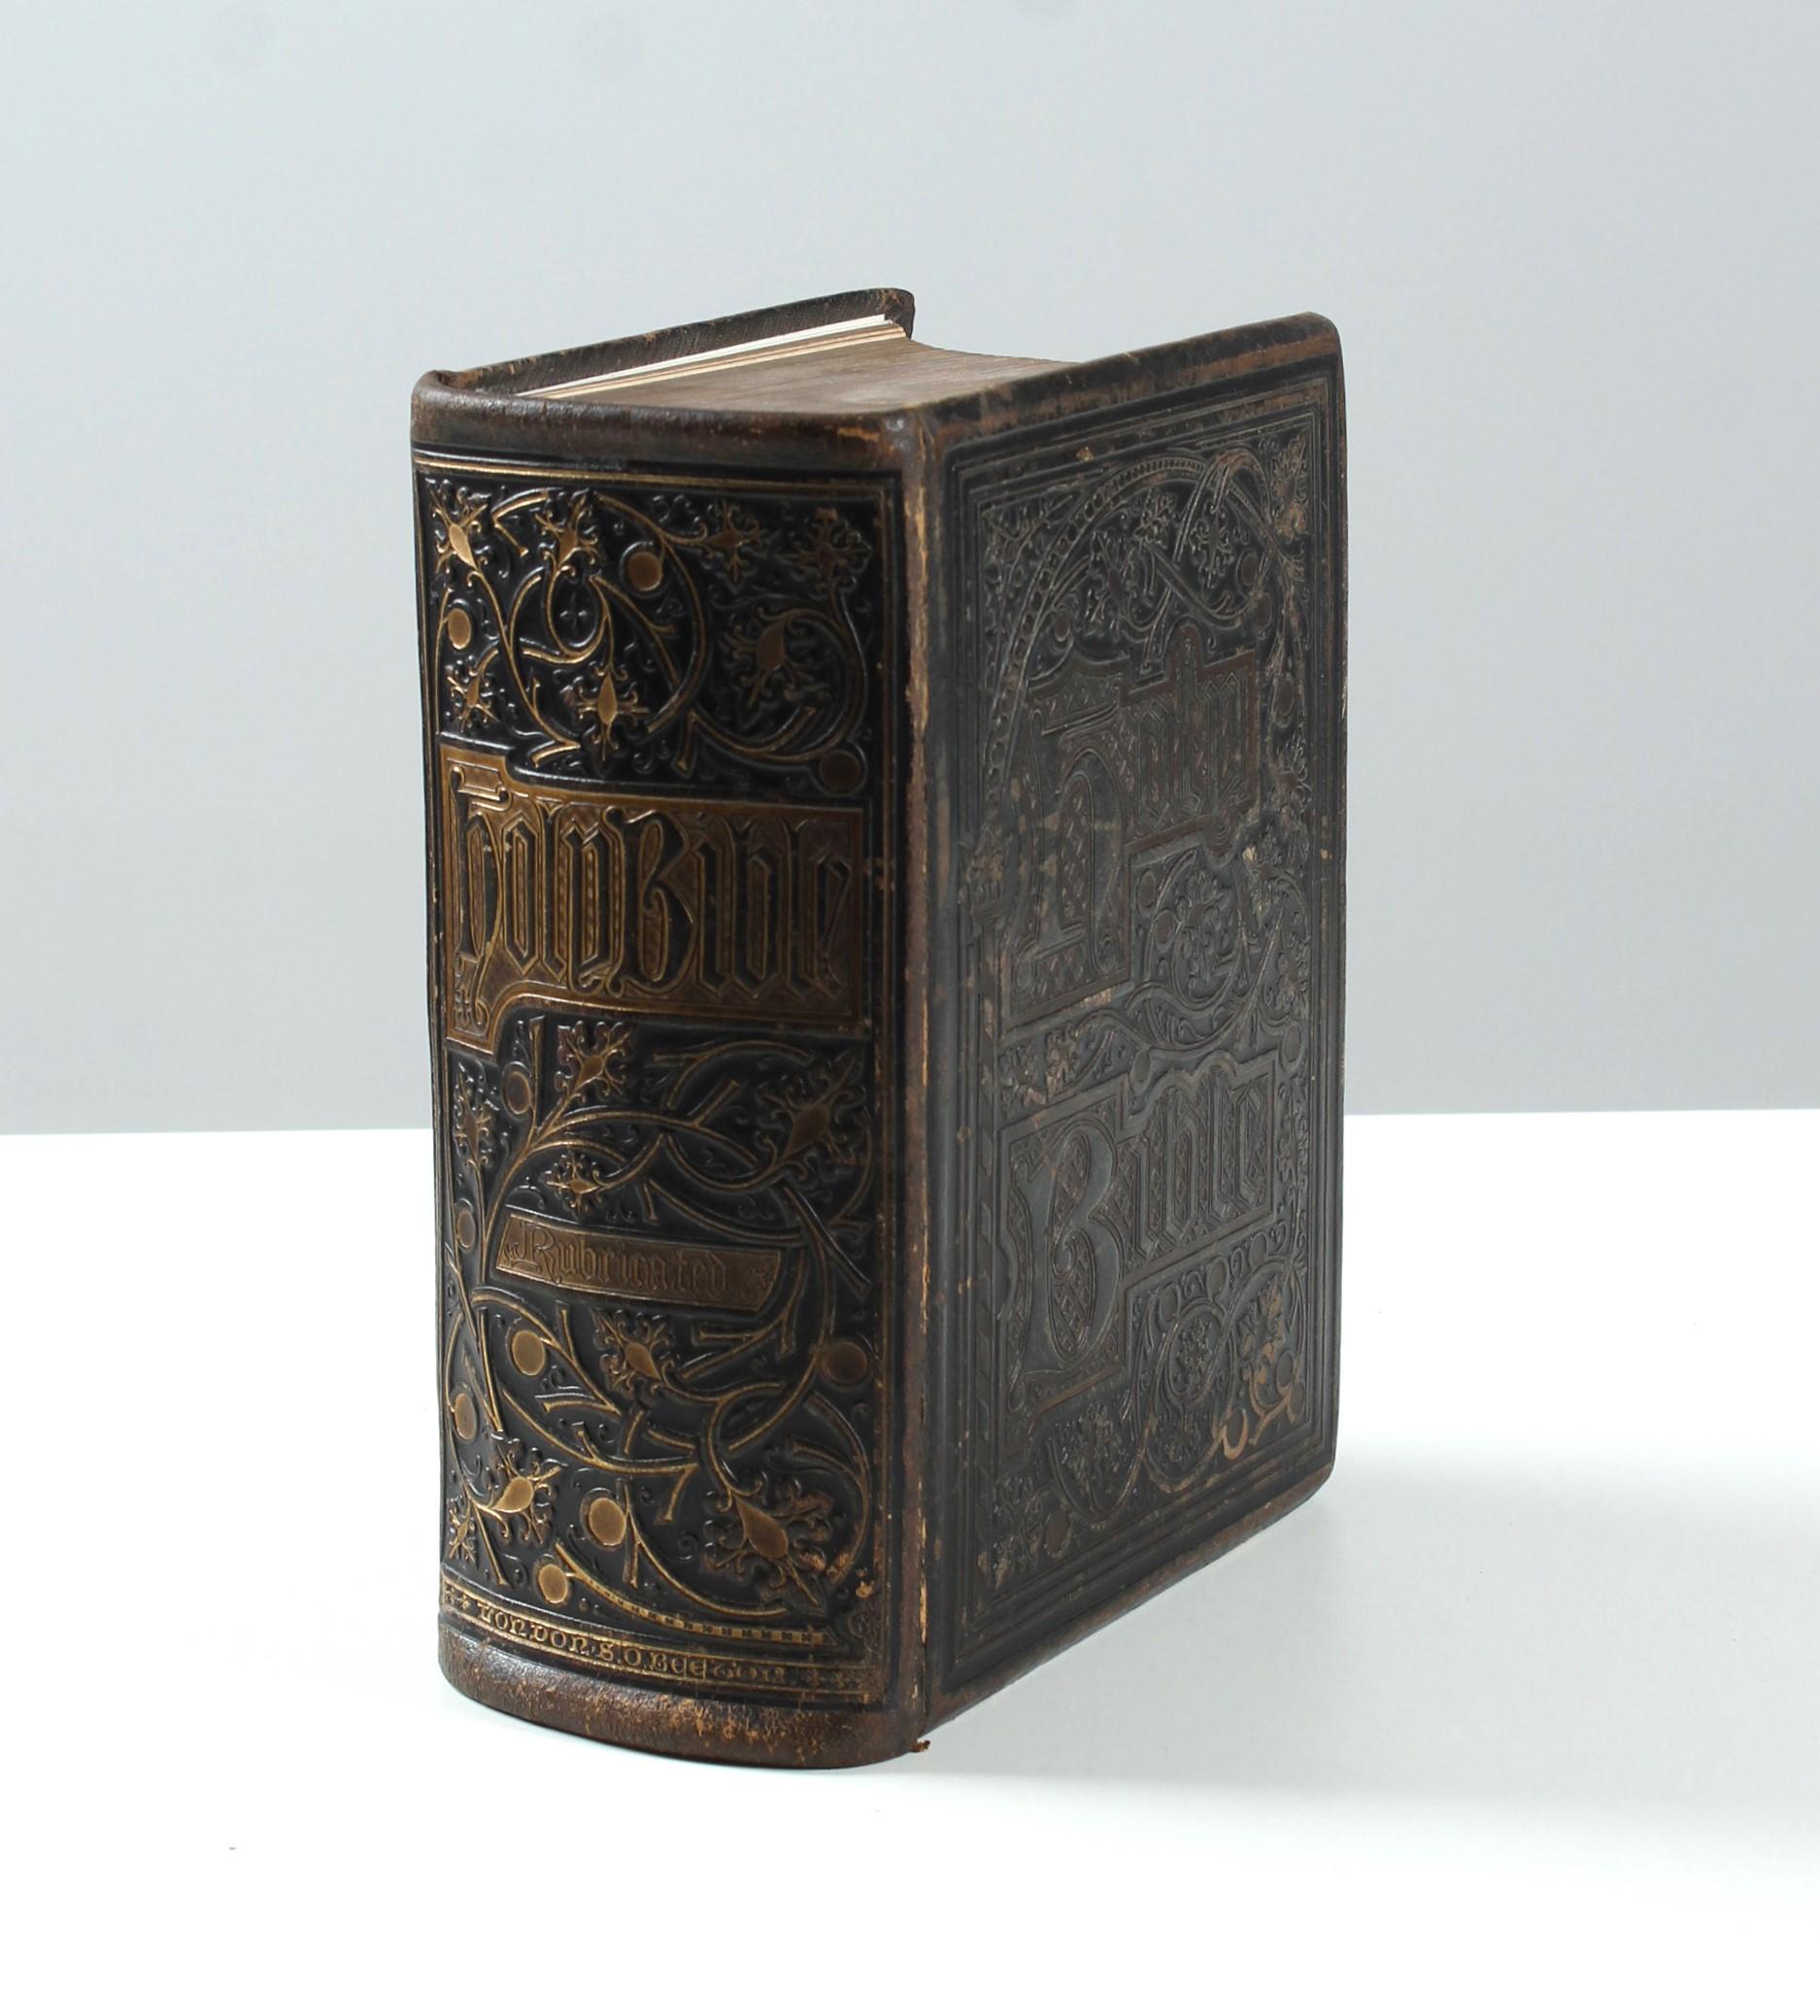 Well preserved antique Bible with numerous copper engravings. Heavy embossed leather binding. Dedication on the first page. Made around 1870.
New and Old Testament.